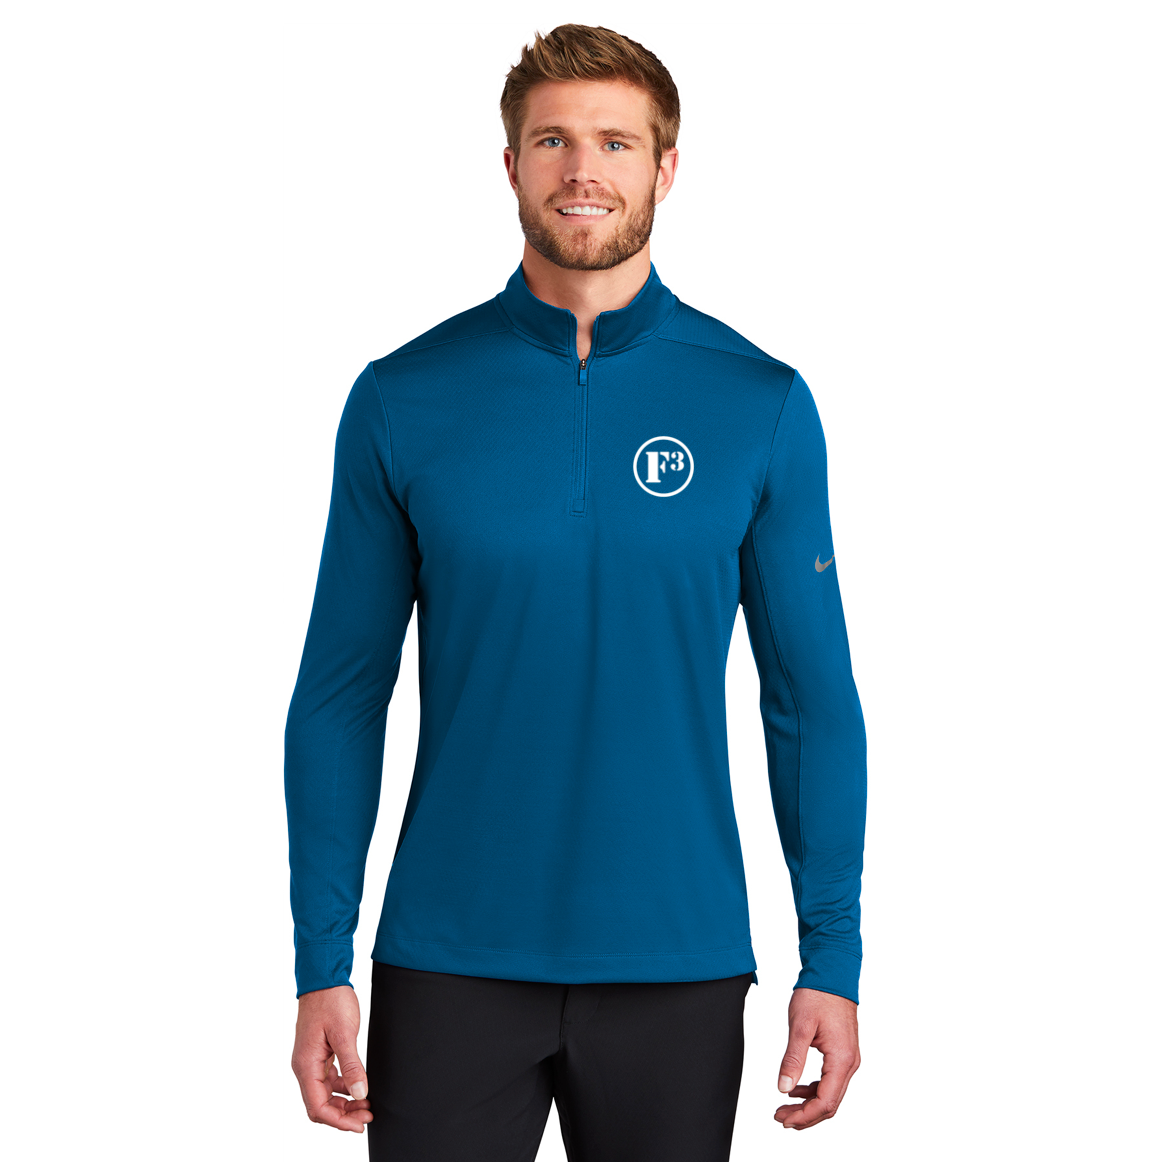 F3 Nike Dry 1/2-Zip Cover-Up - Made to Order